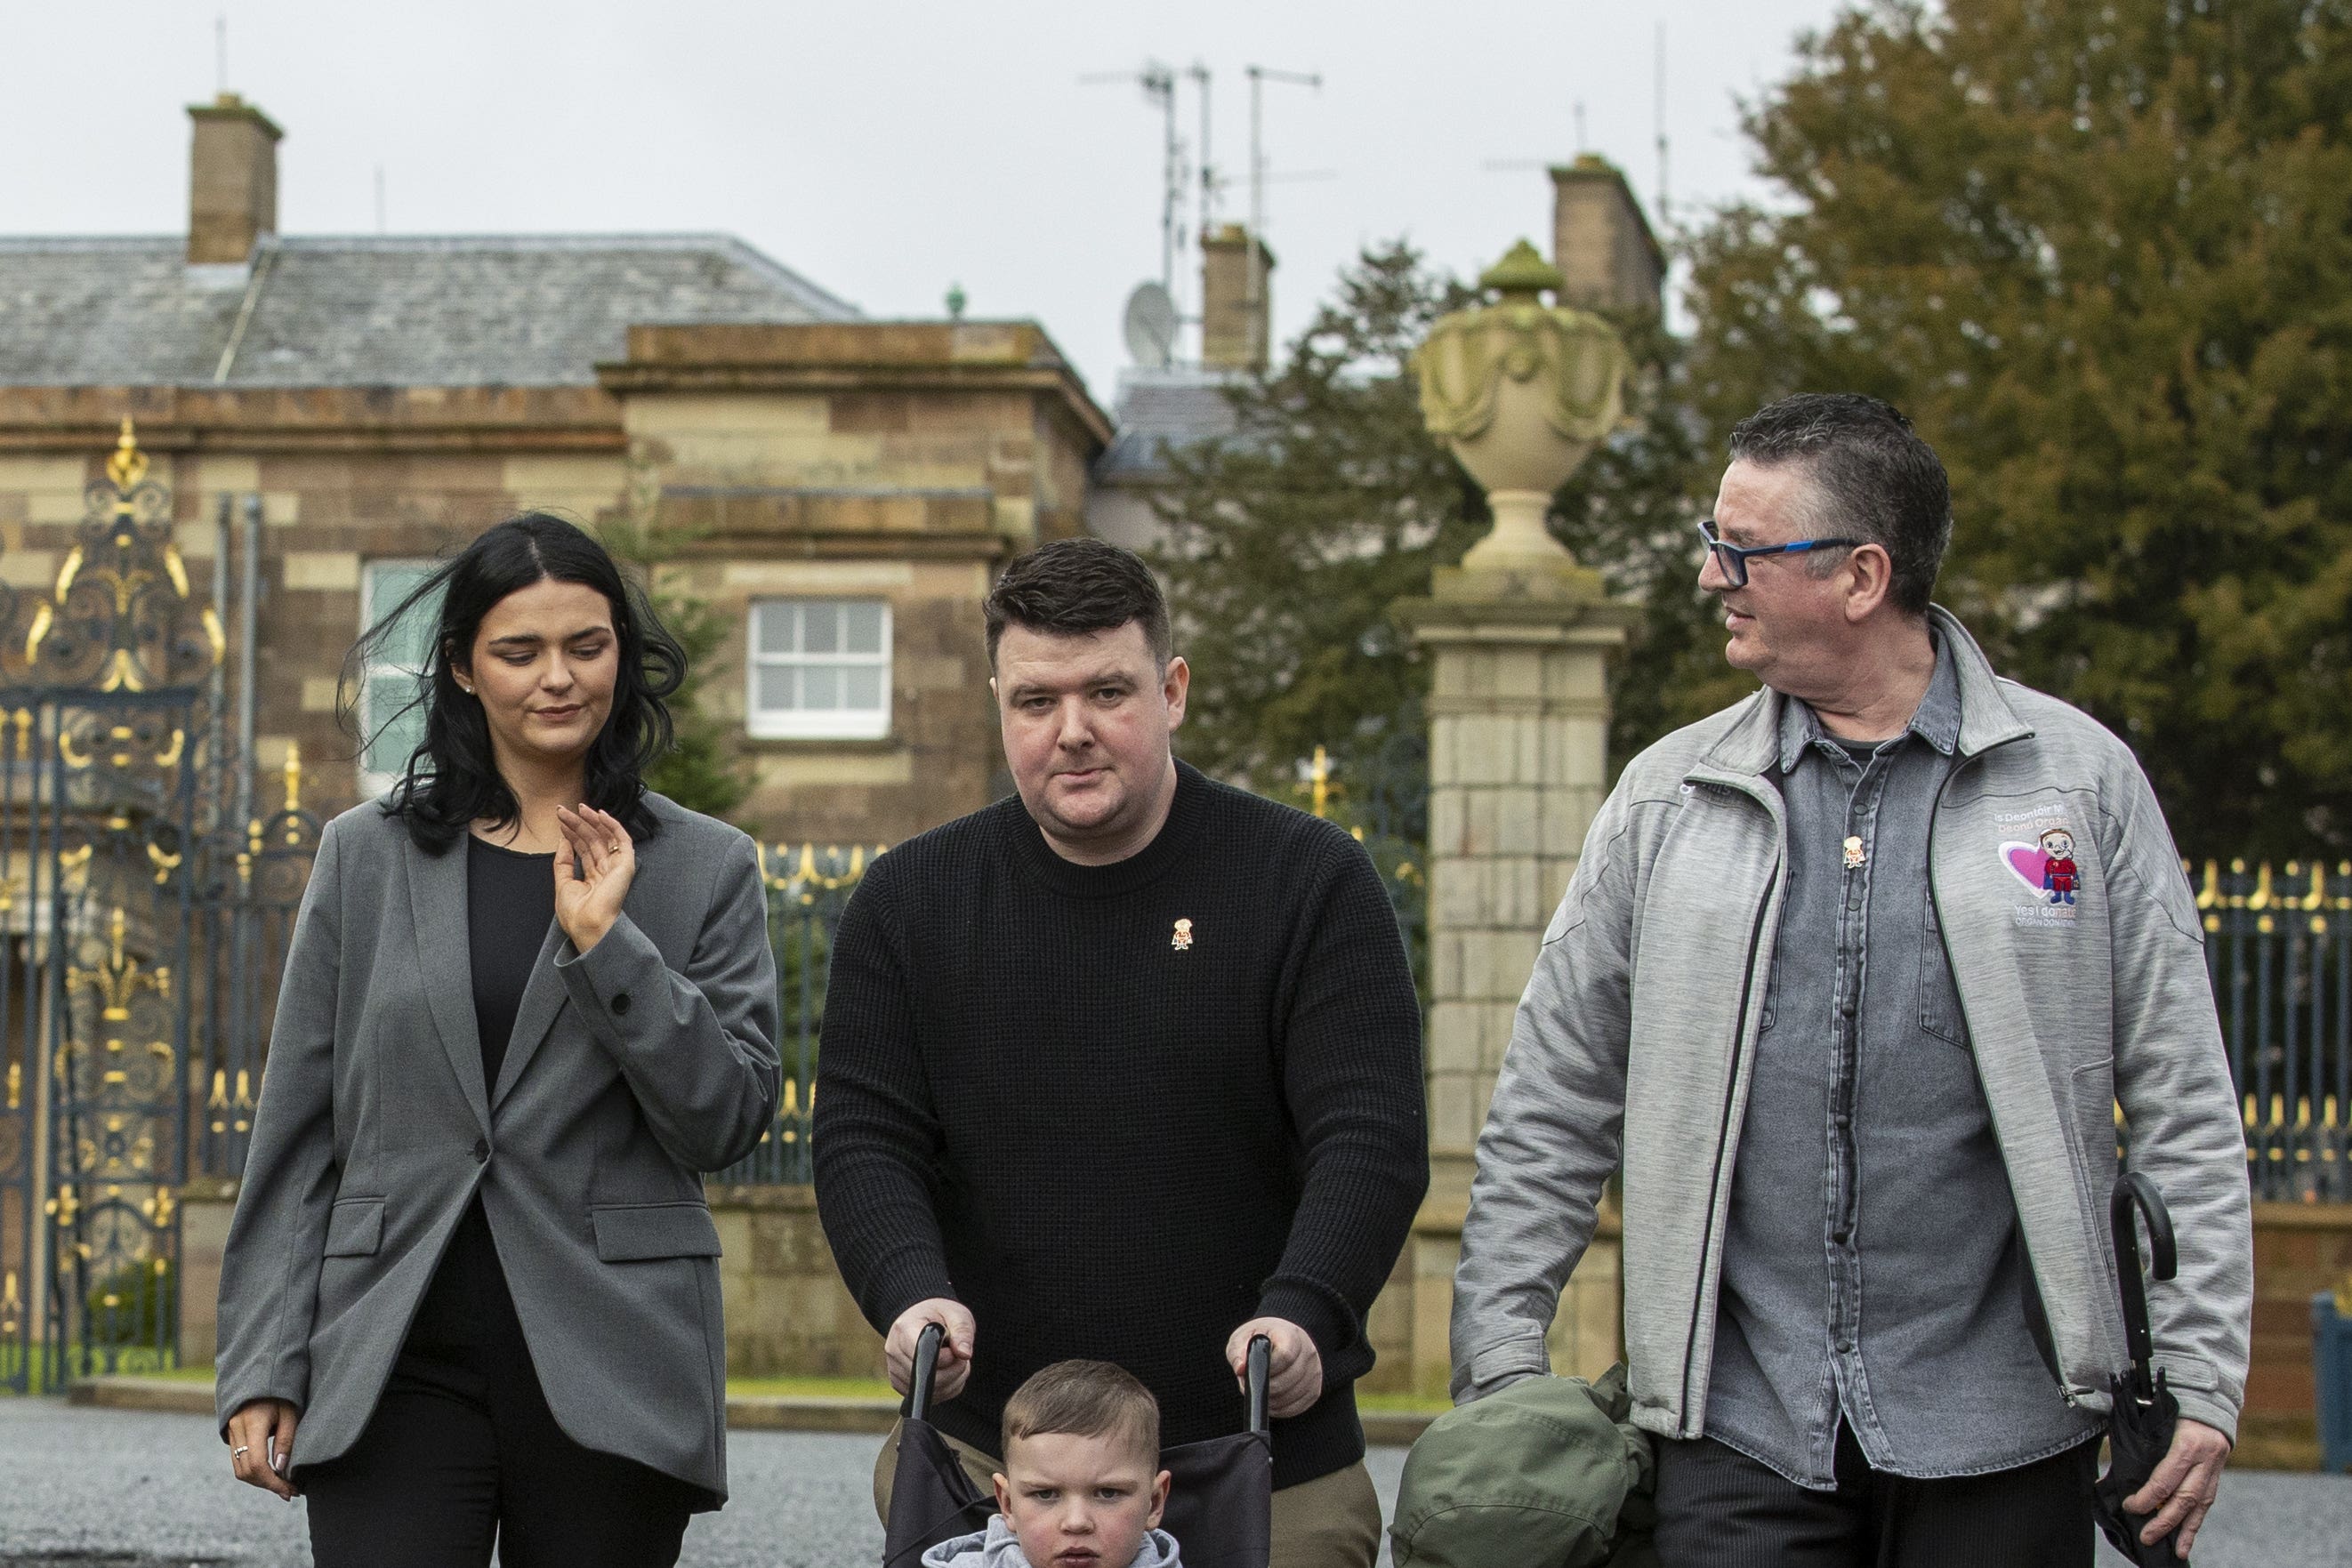 Mairtin MacGabhann and Seph Ni Mheallain with their son of Daithi MacGabhann, six, and his grandfather Martin Smith, outside Hillsborough Castle in Northern Ireland, after they met with Northern Ireland Secretary Chris Heaton-Harris to discuss delays implementing new organ donation laws in the region (Liam McBurney/PA)